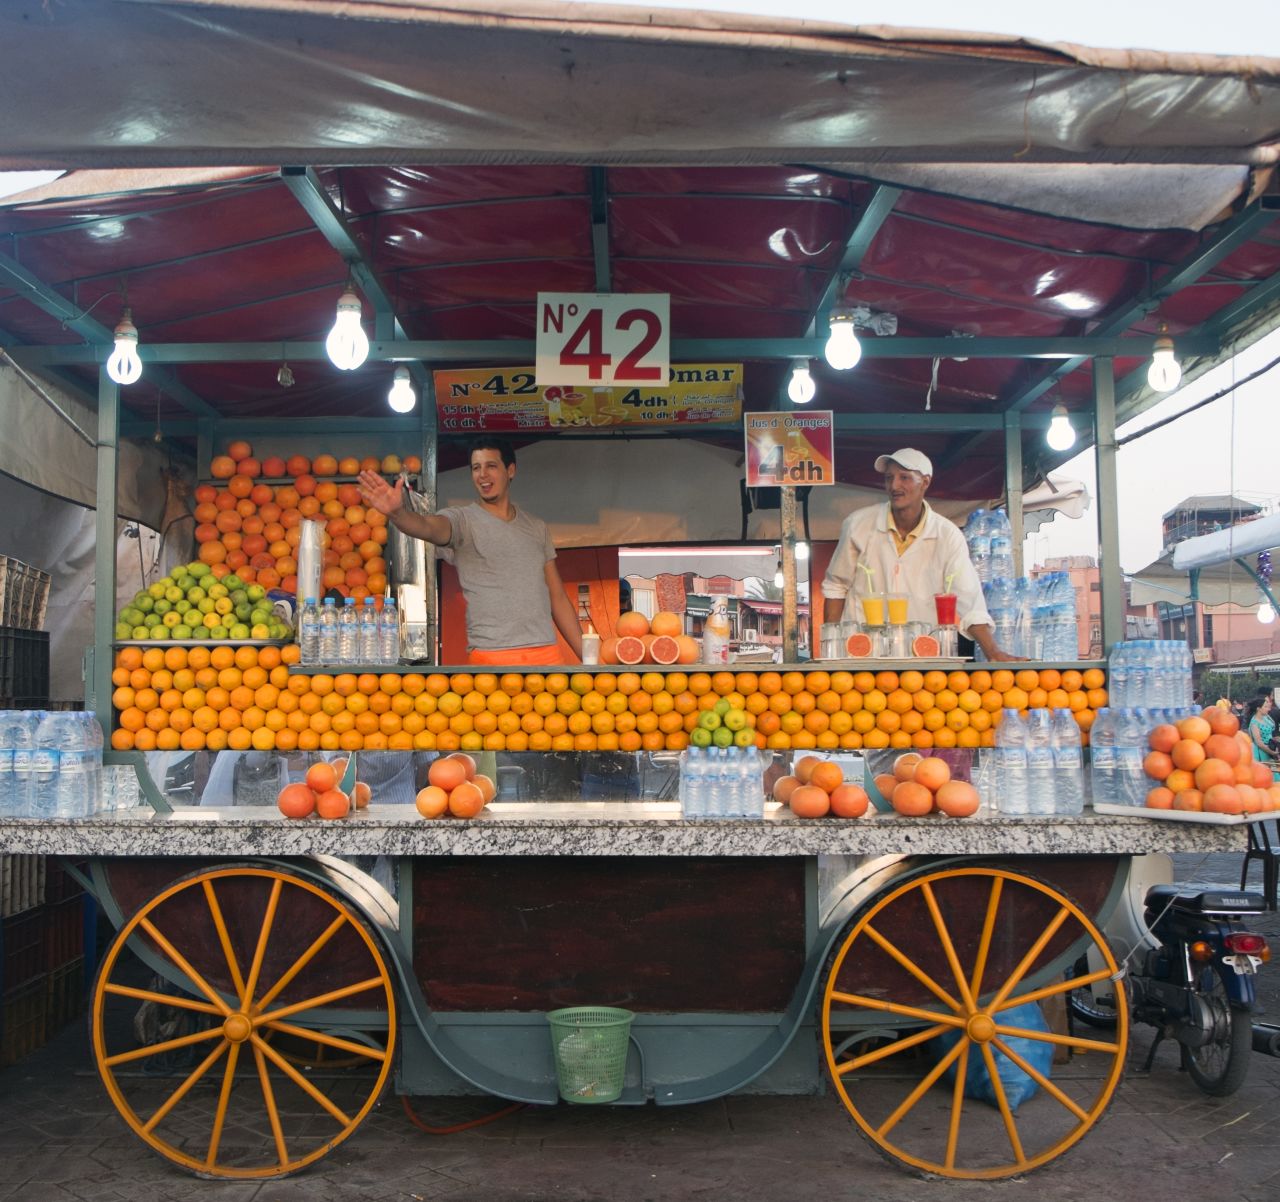 Jemaa el-Fna is a traditional haunt for food and drink vendors. Many carts sell freshly squeezed orange juice.